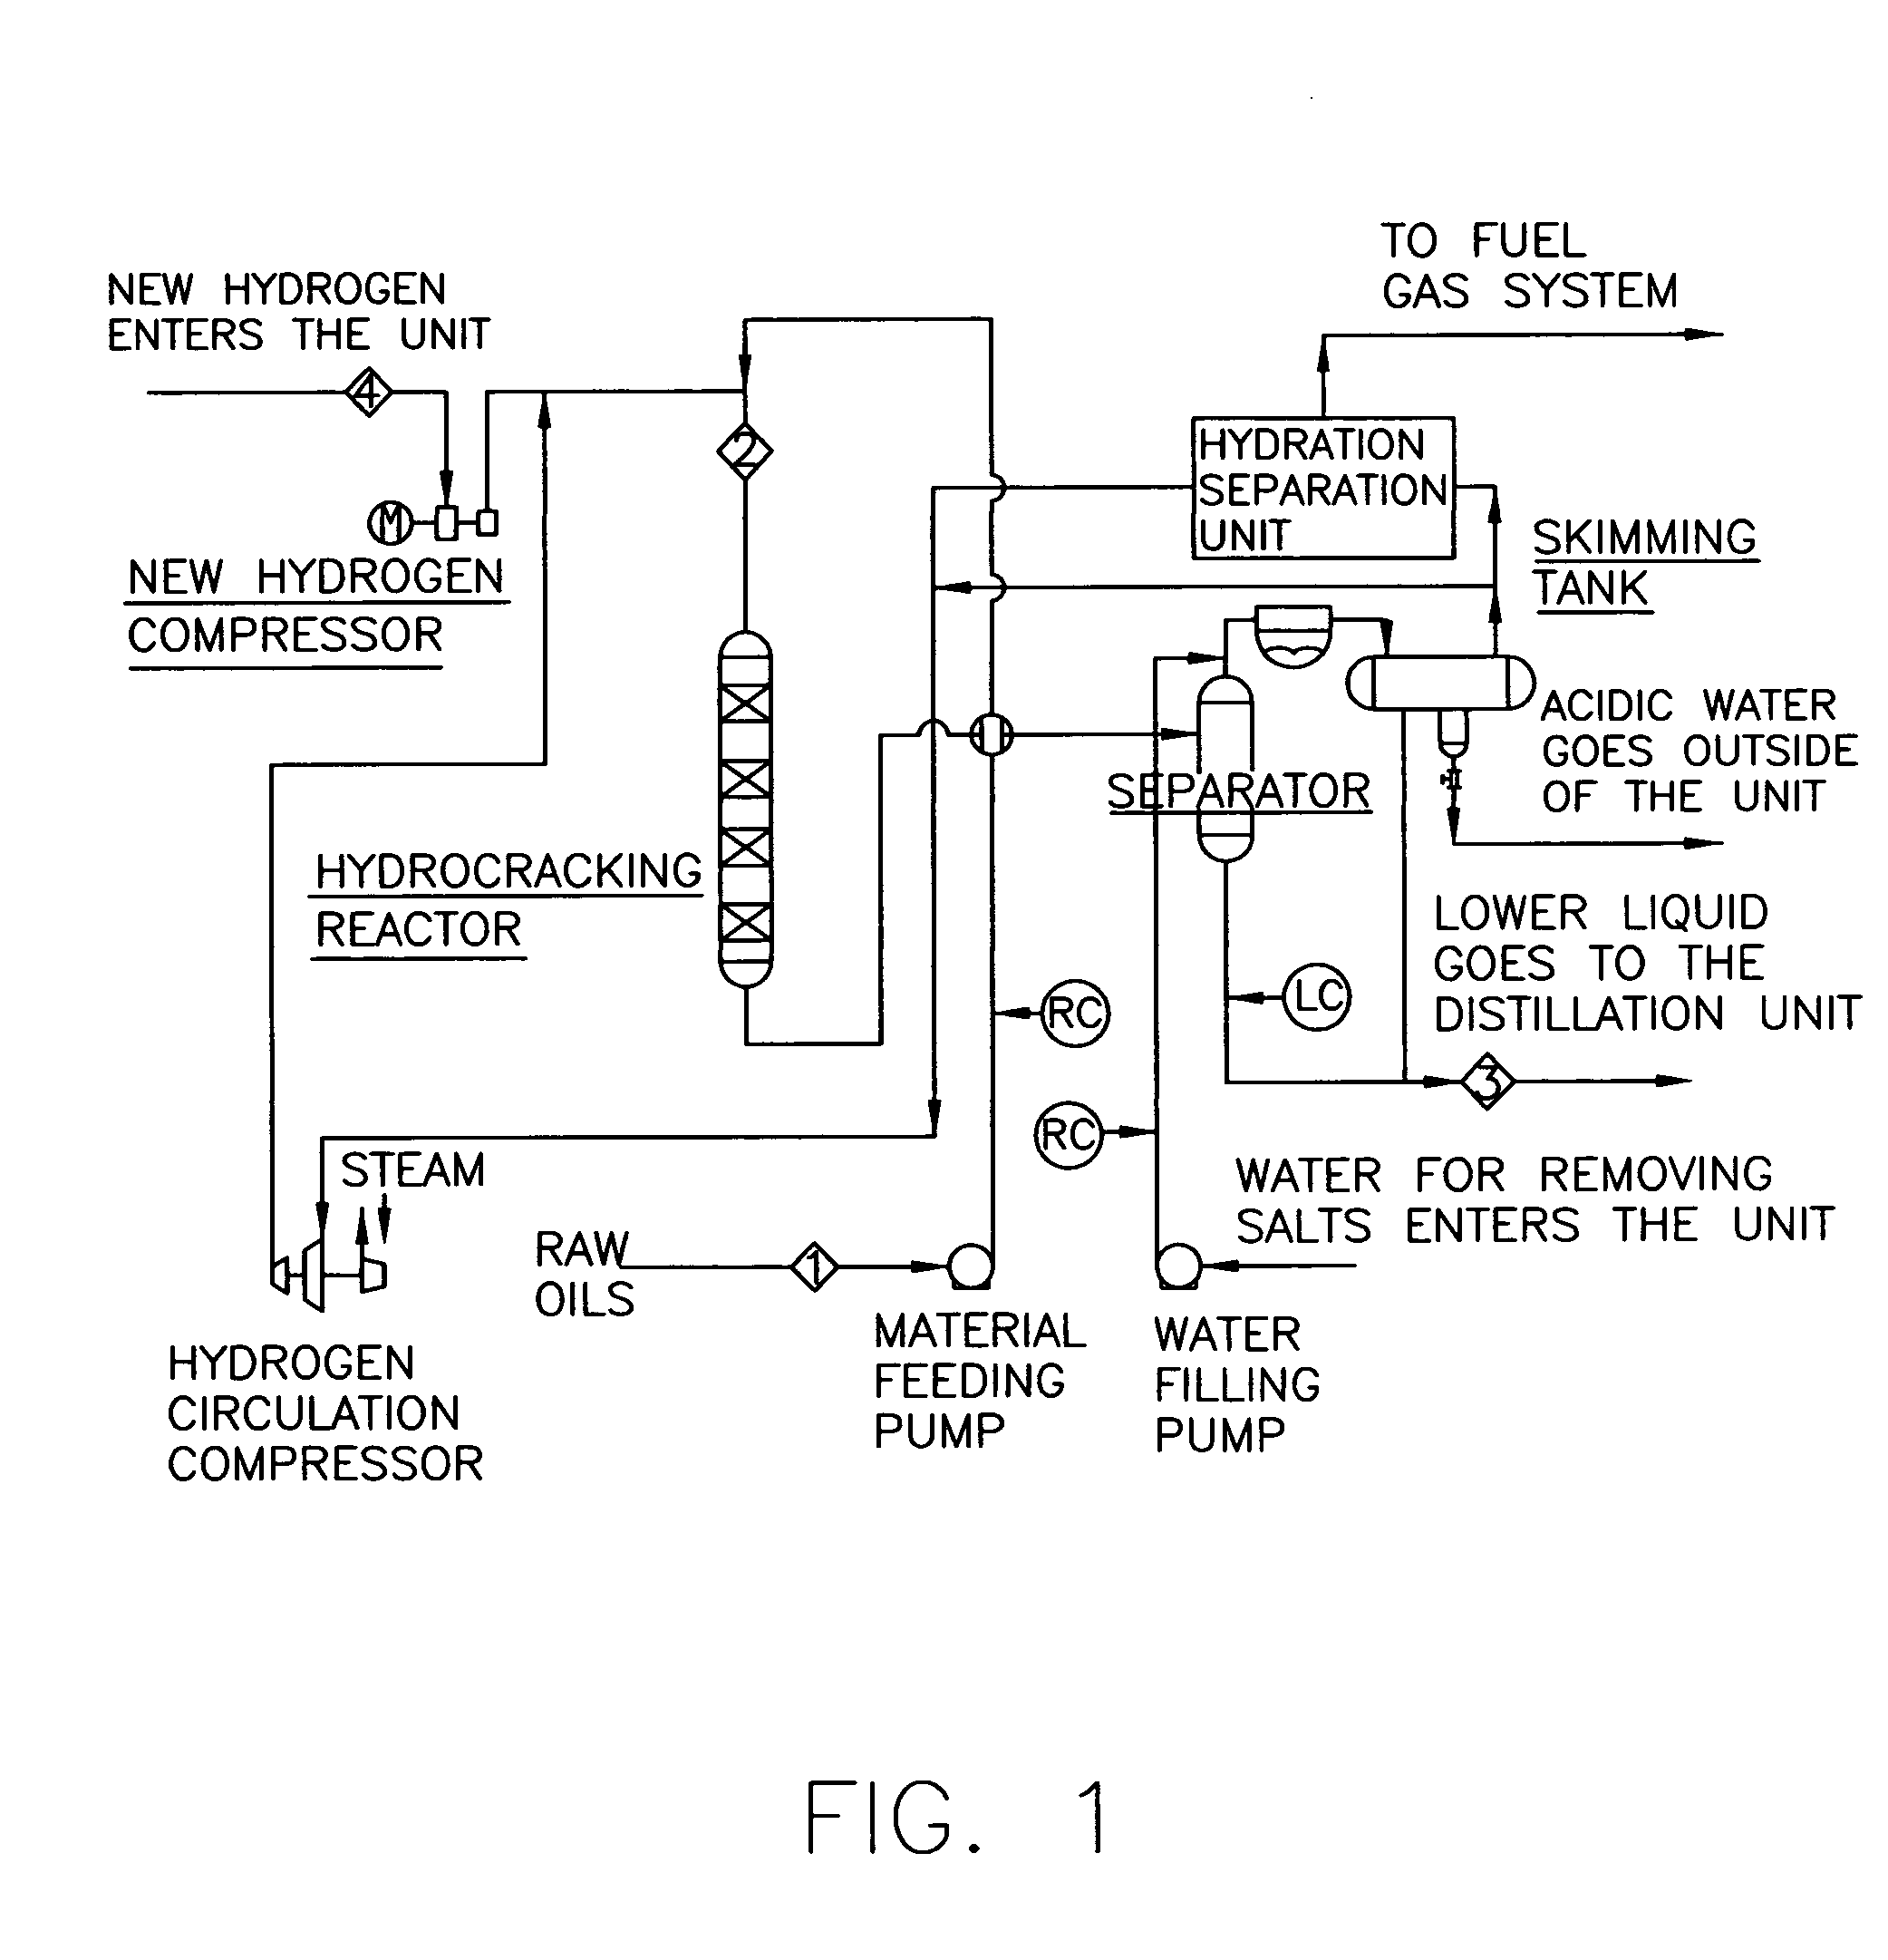 Apparatus and method for increasing the concentration of recycled hydrogen in a high pressure hydrogenation reactor